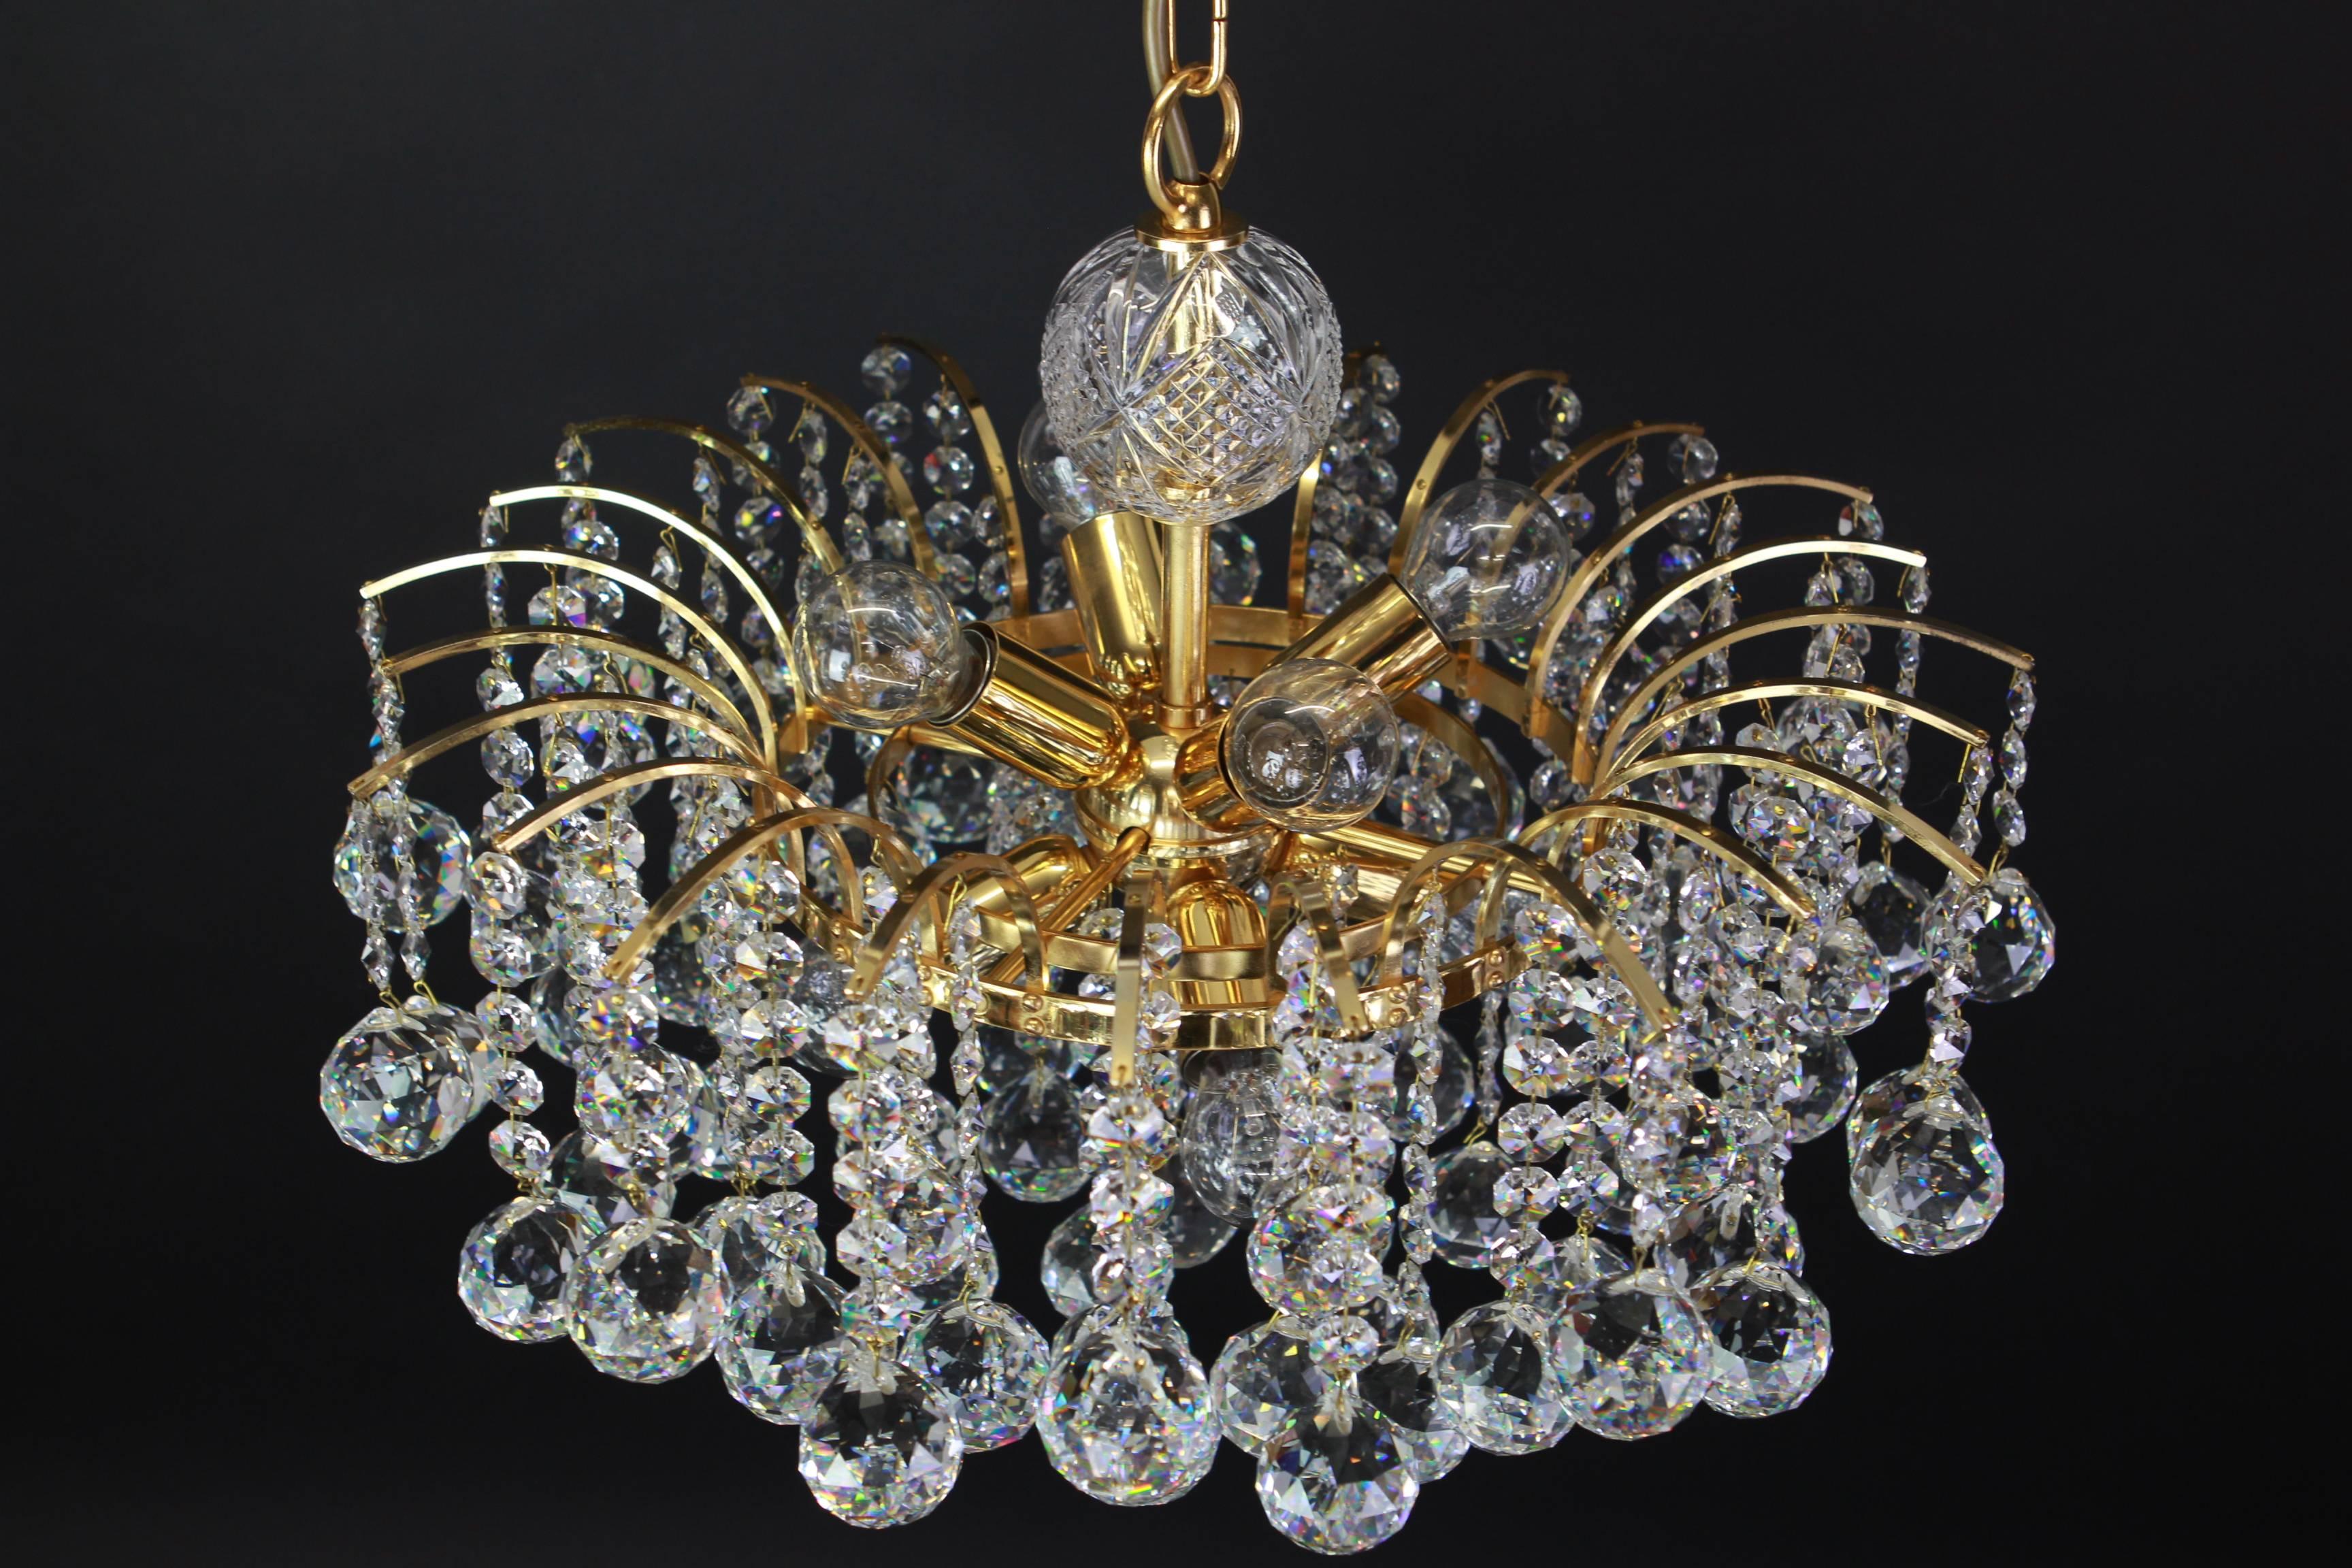 Beautiful Christoph Palme Chandelier Midcentury Crystal Balls, 1970s For Sale 1